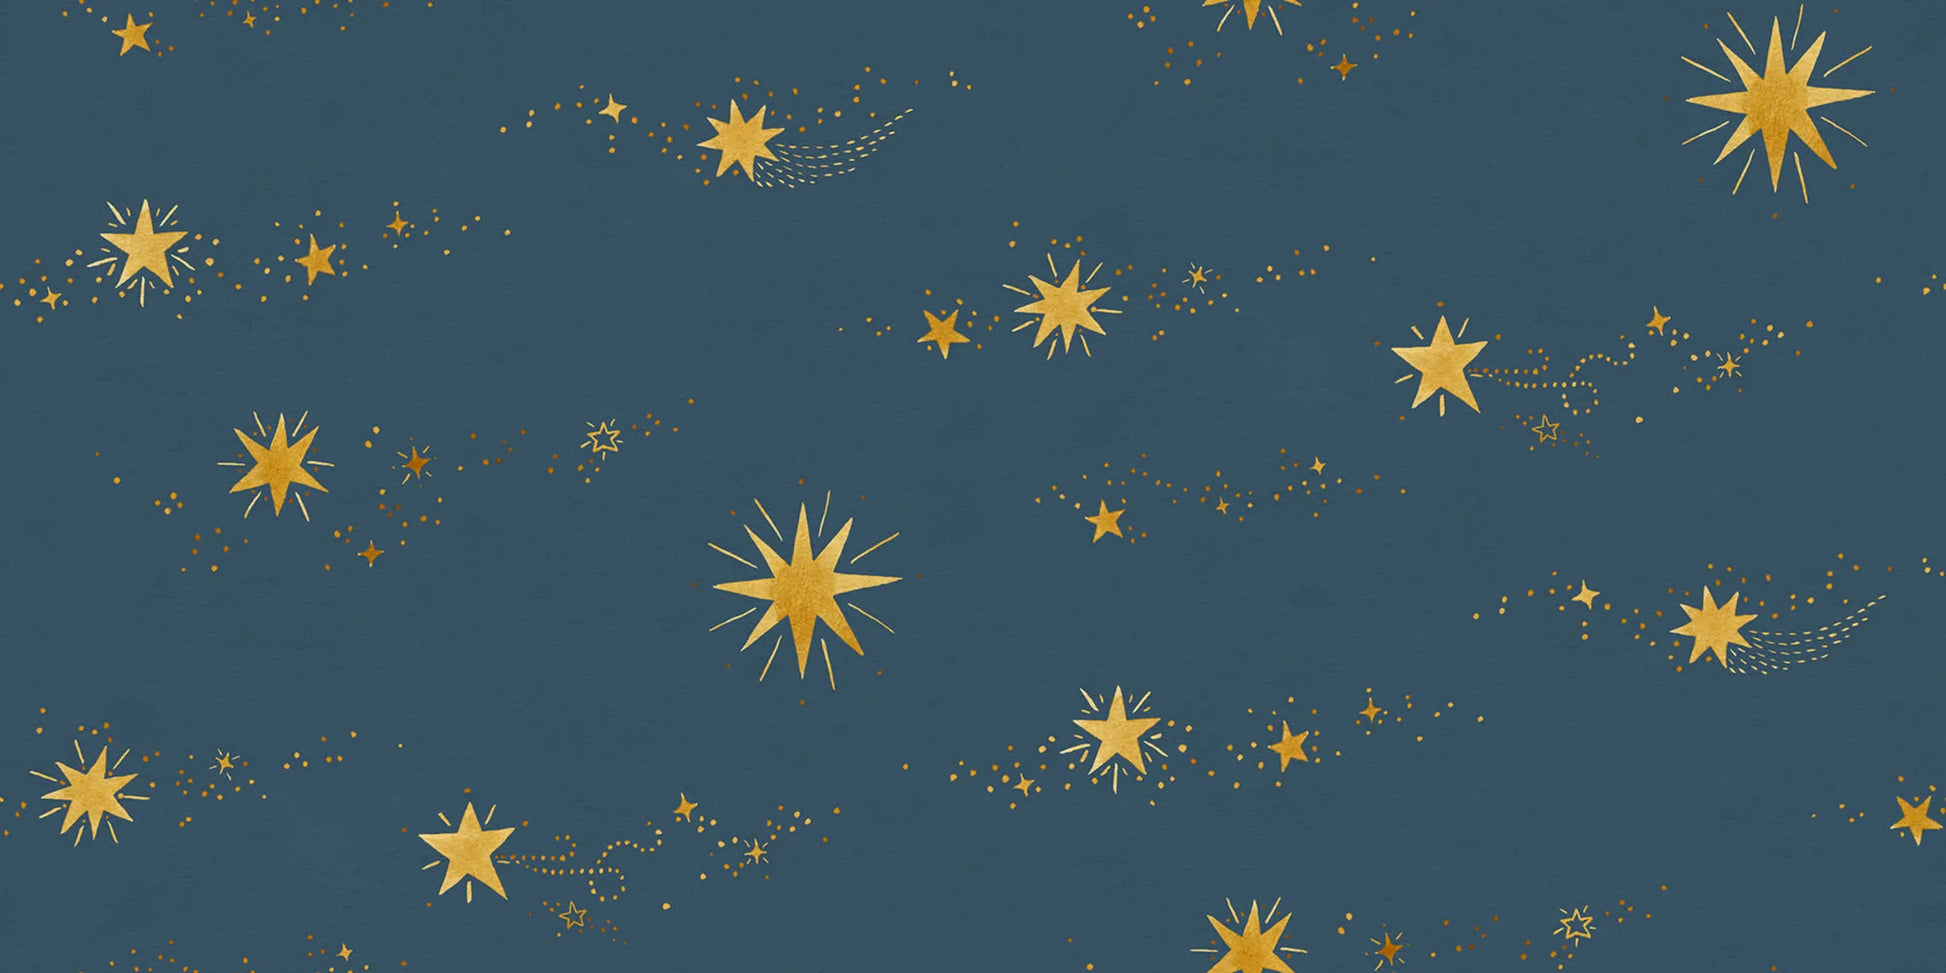 The beautiful hand-painted stars dance over the wallpaper like stars in the sky. Created together with Johanna Bradford as a dreamy ceiling wallpaper, but it also works beautifully on the wall.